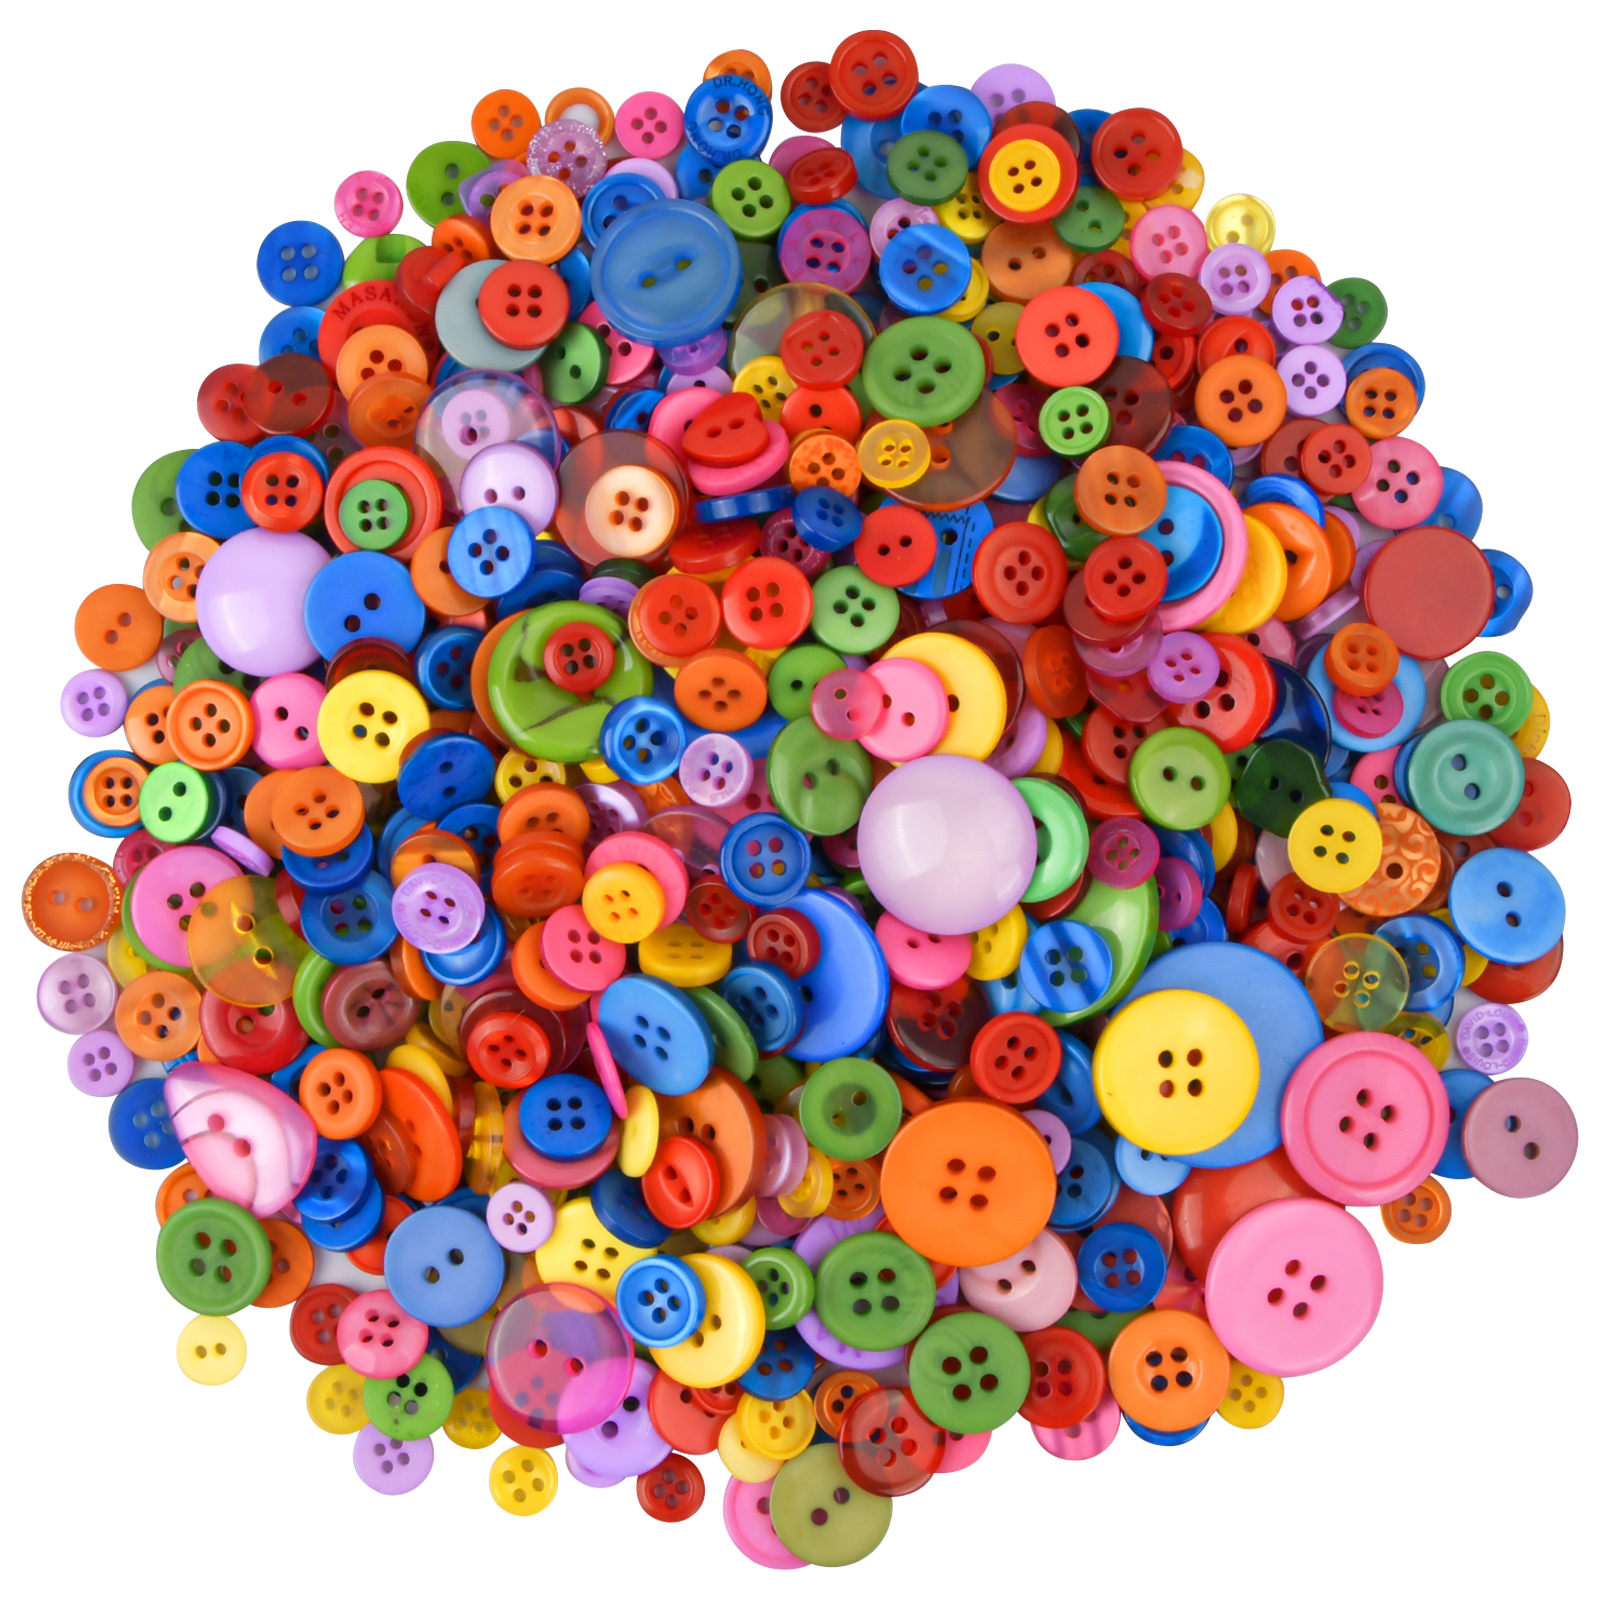 60g Pack Plastic Buttons - Assorted Coloured & Sized Buttons